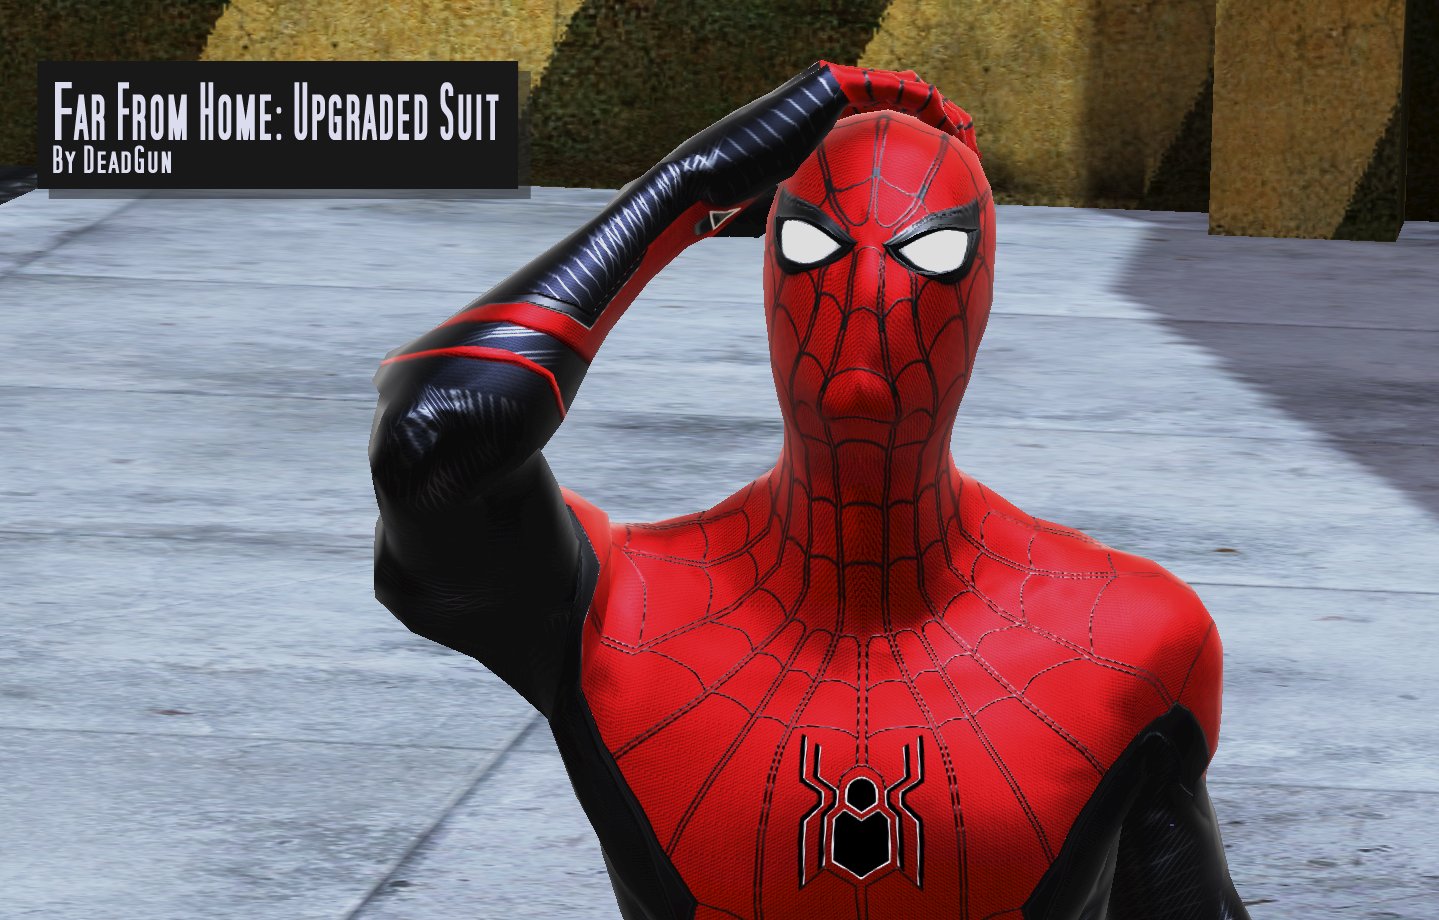 Kris/DeadGun on X: I'm happy to announce my own Spider-Man Web of